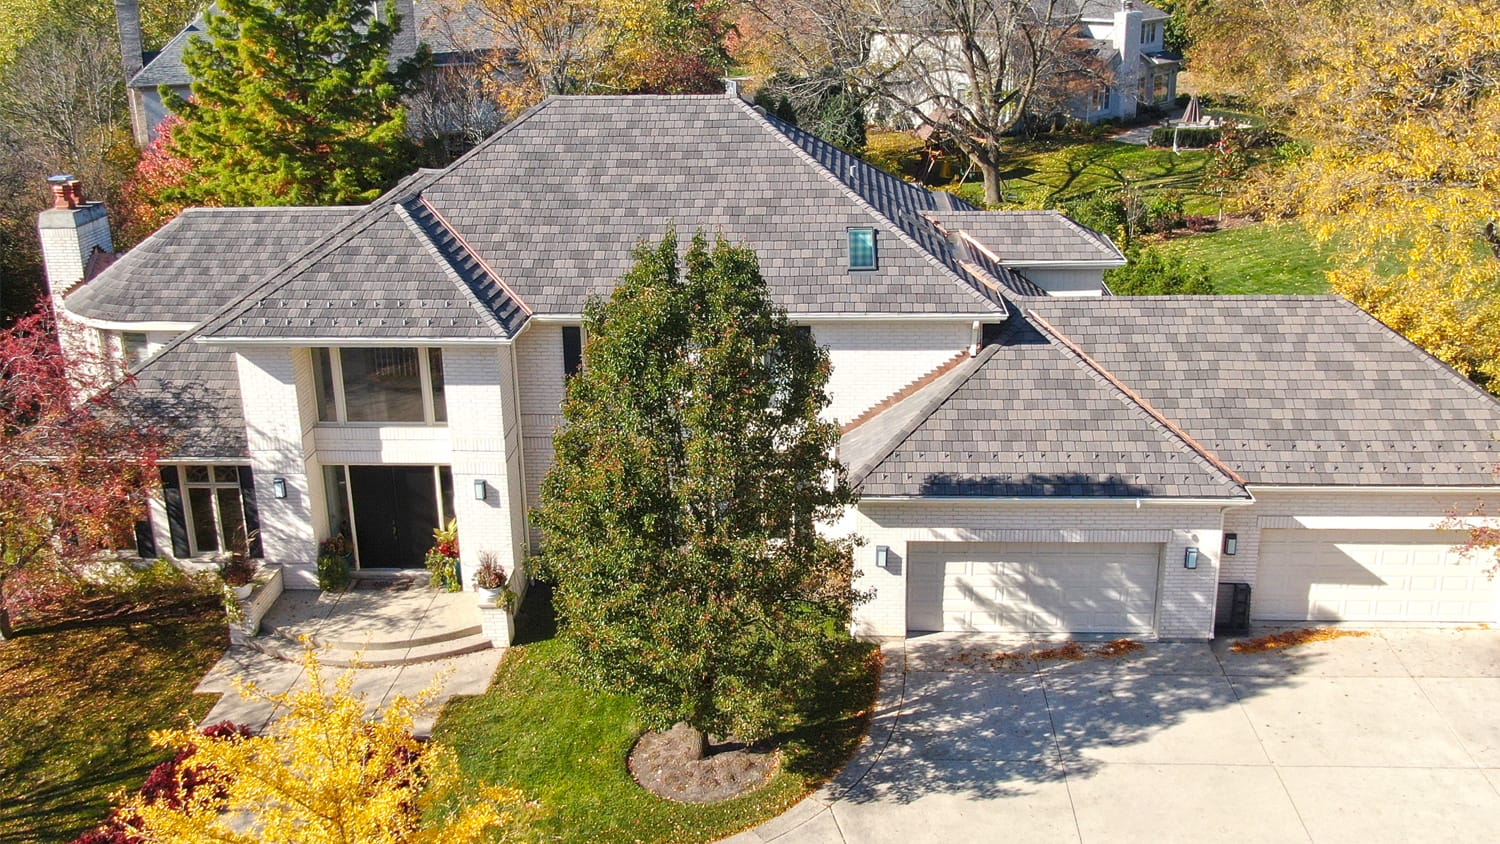 Composite slate roof installation on residential home